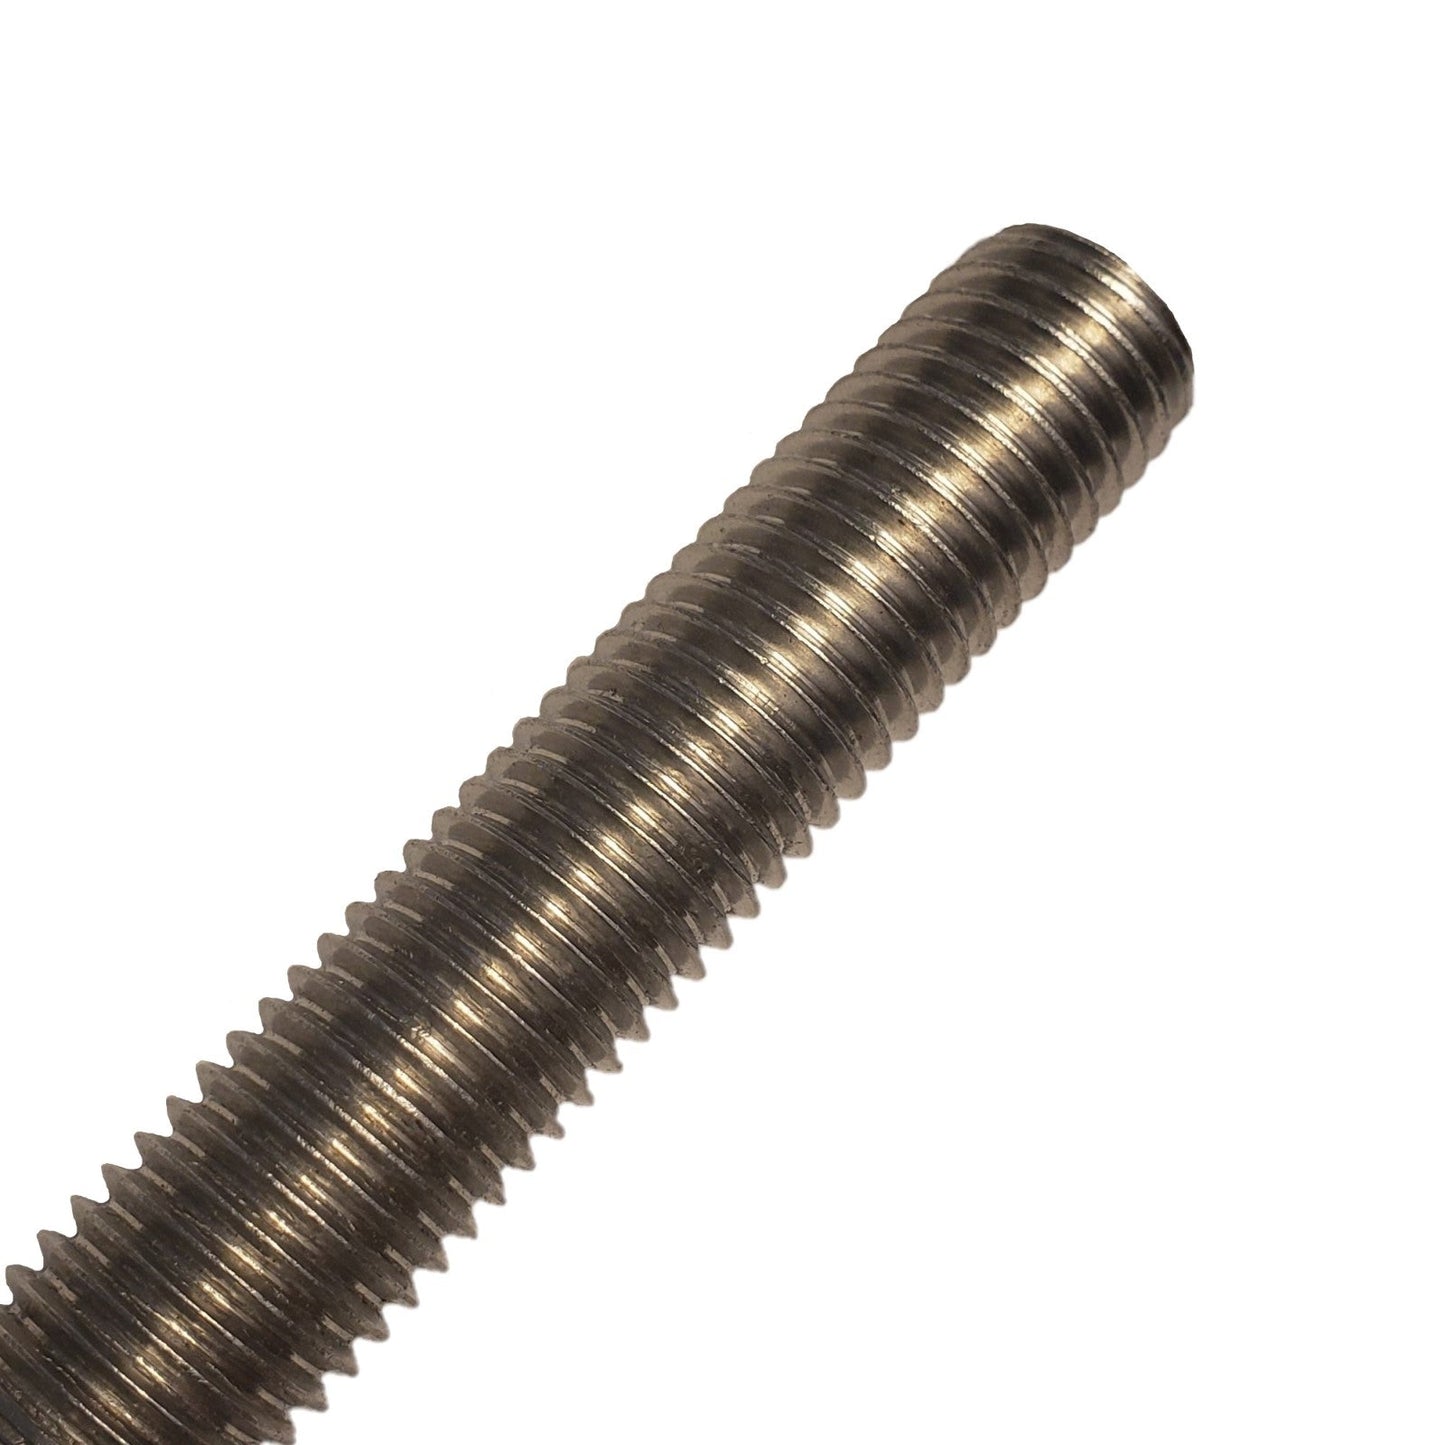 7/8"-9 x 2' 316 Stainless Threaded Rod - Made In USA